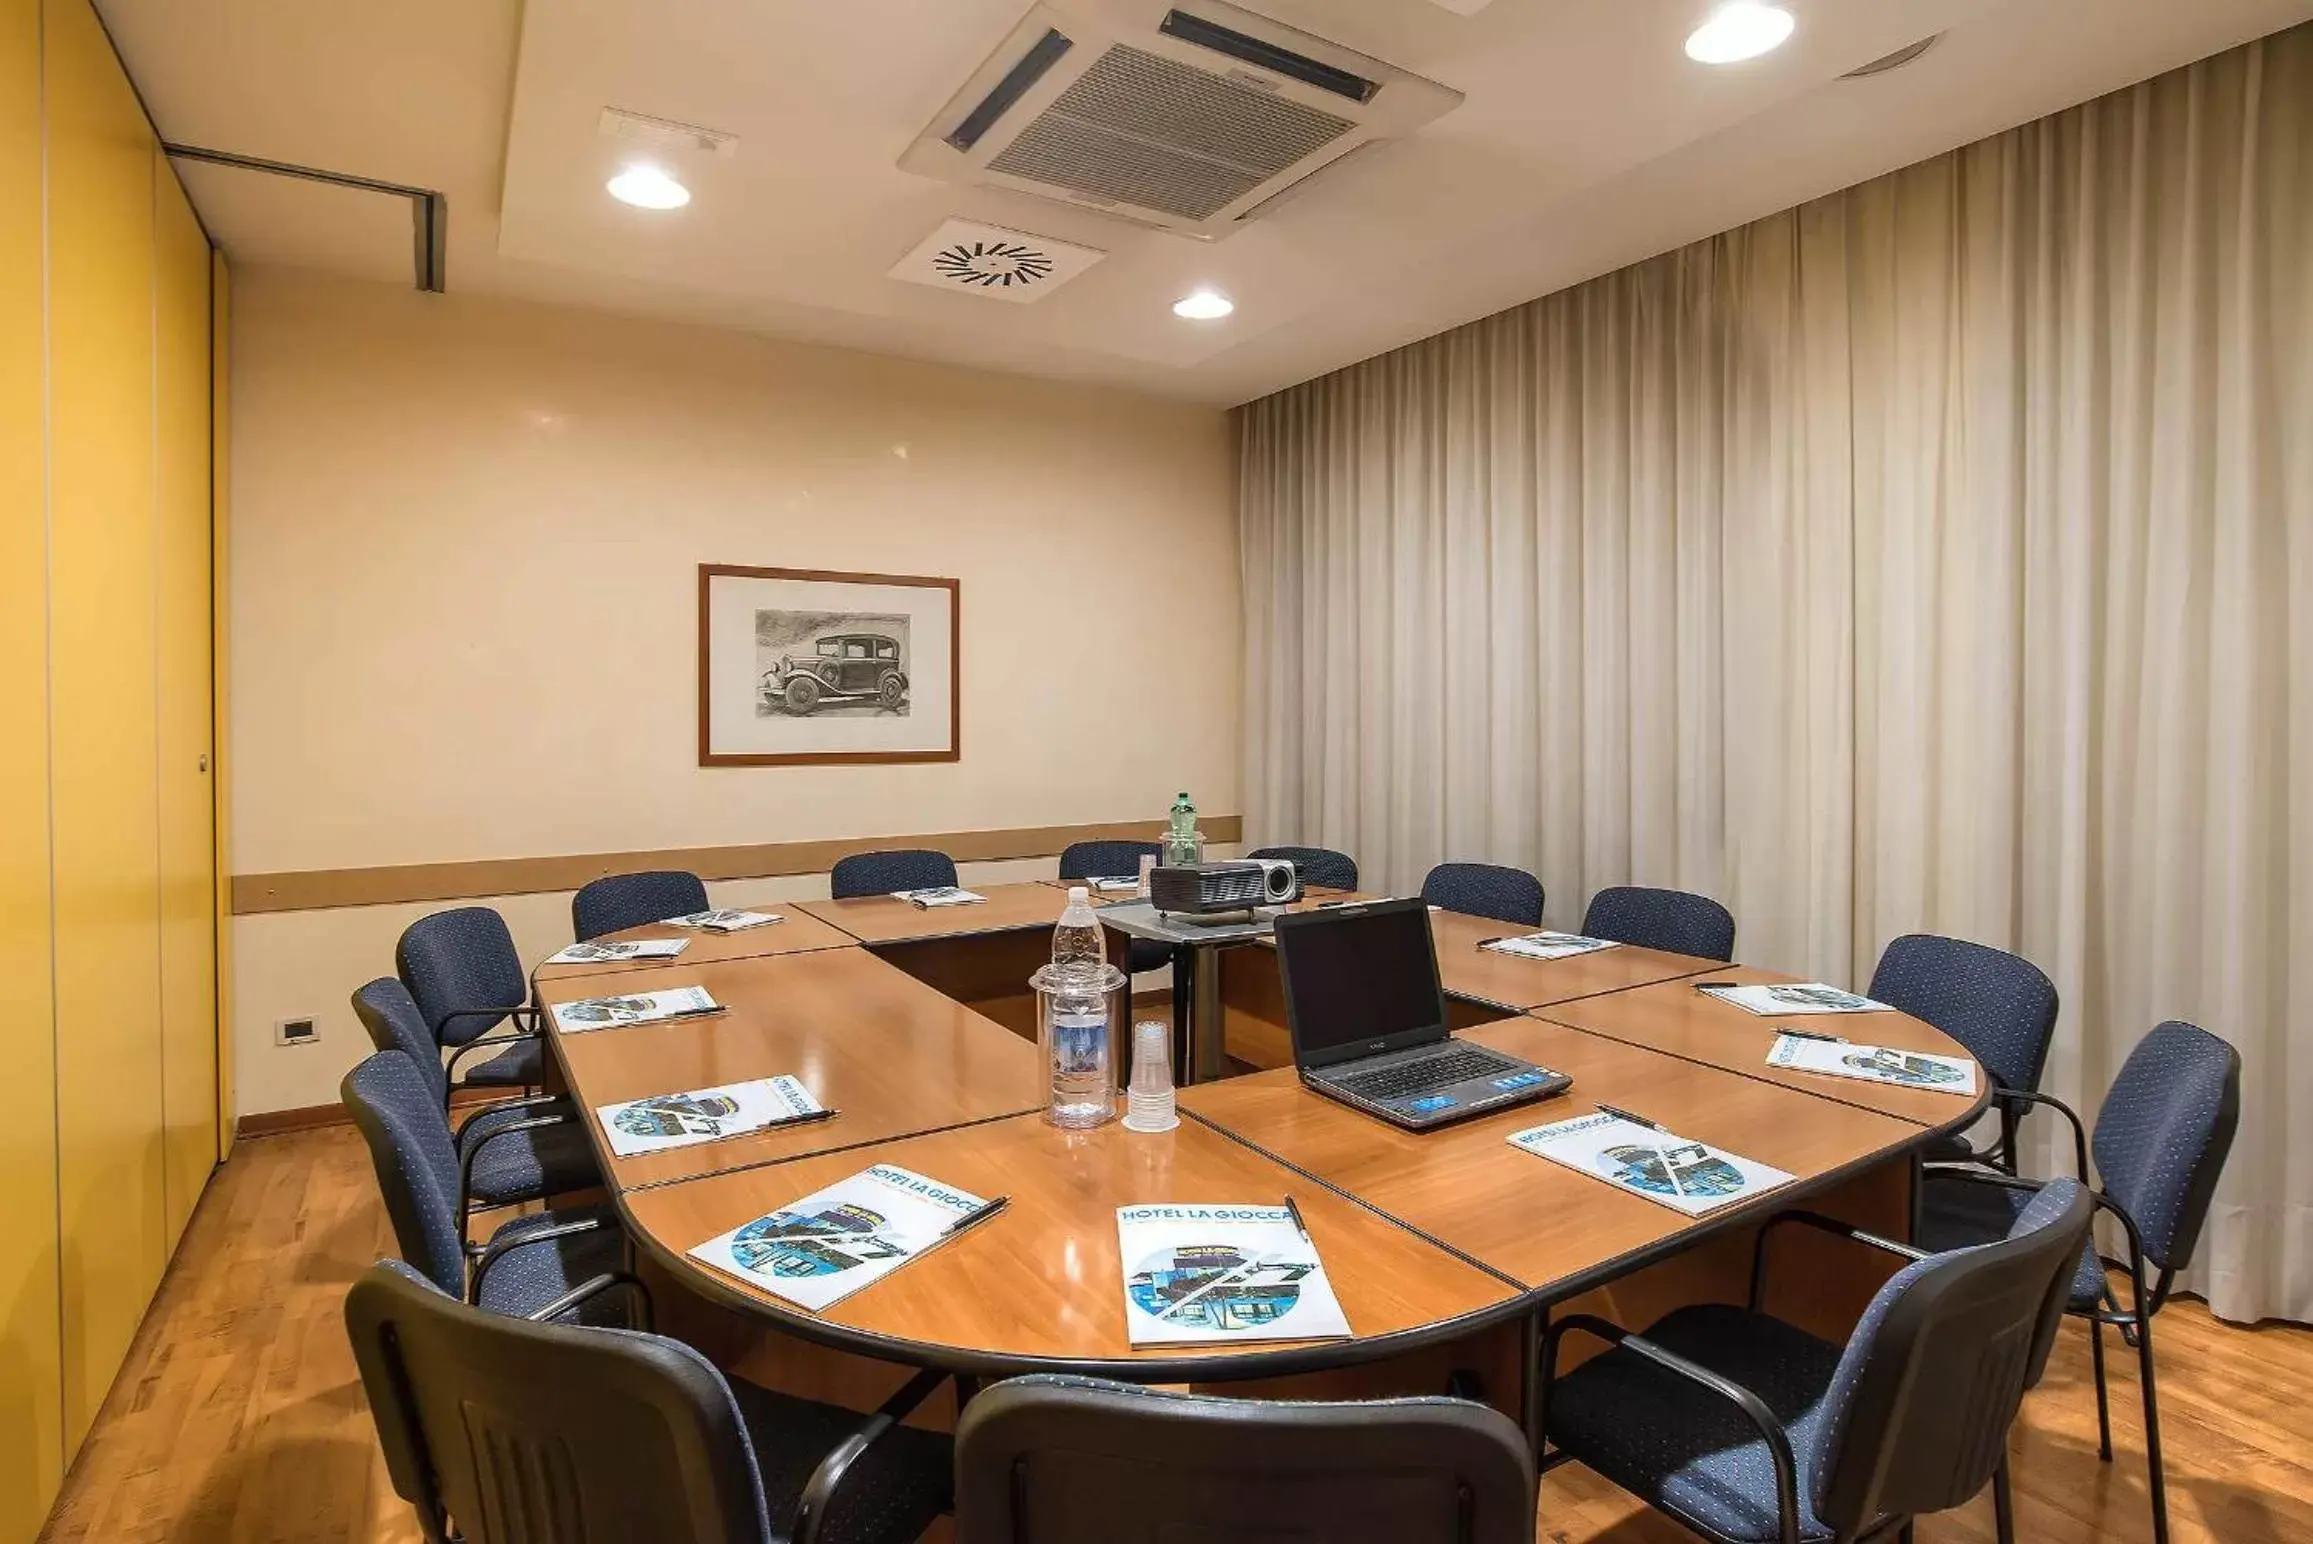 Meeting/conference room, Business Area/Conference Room in Hotel La Giocca